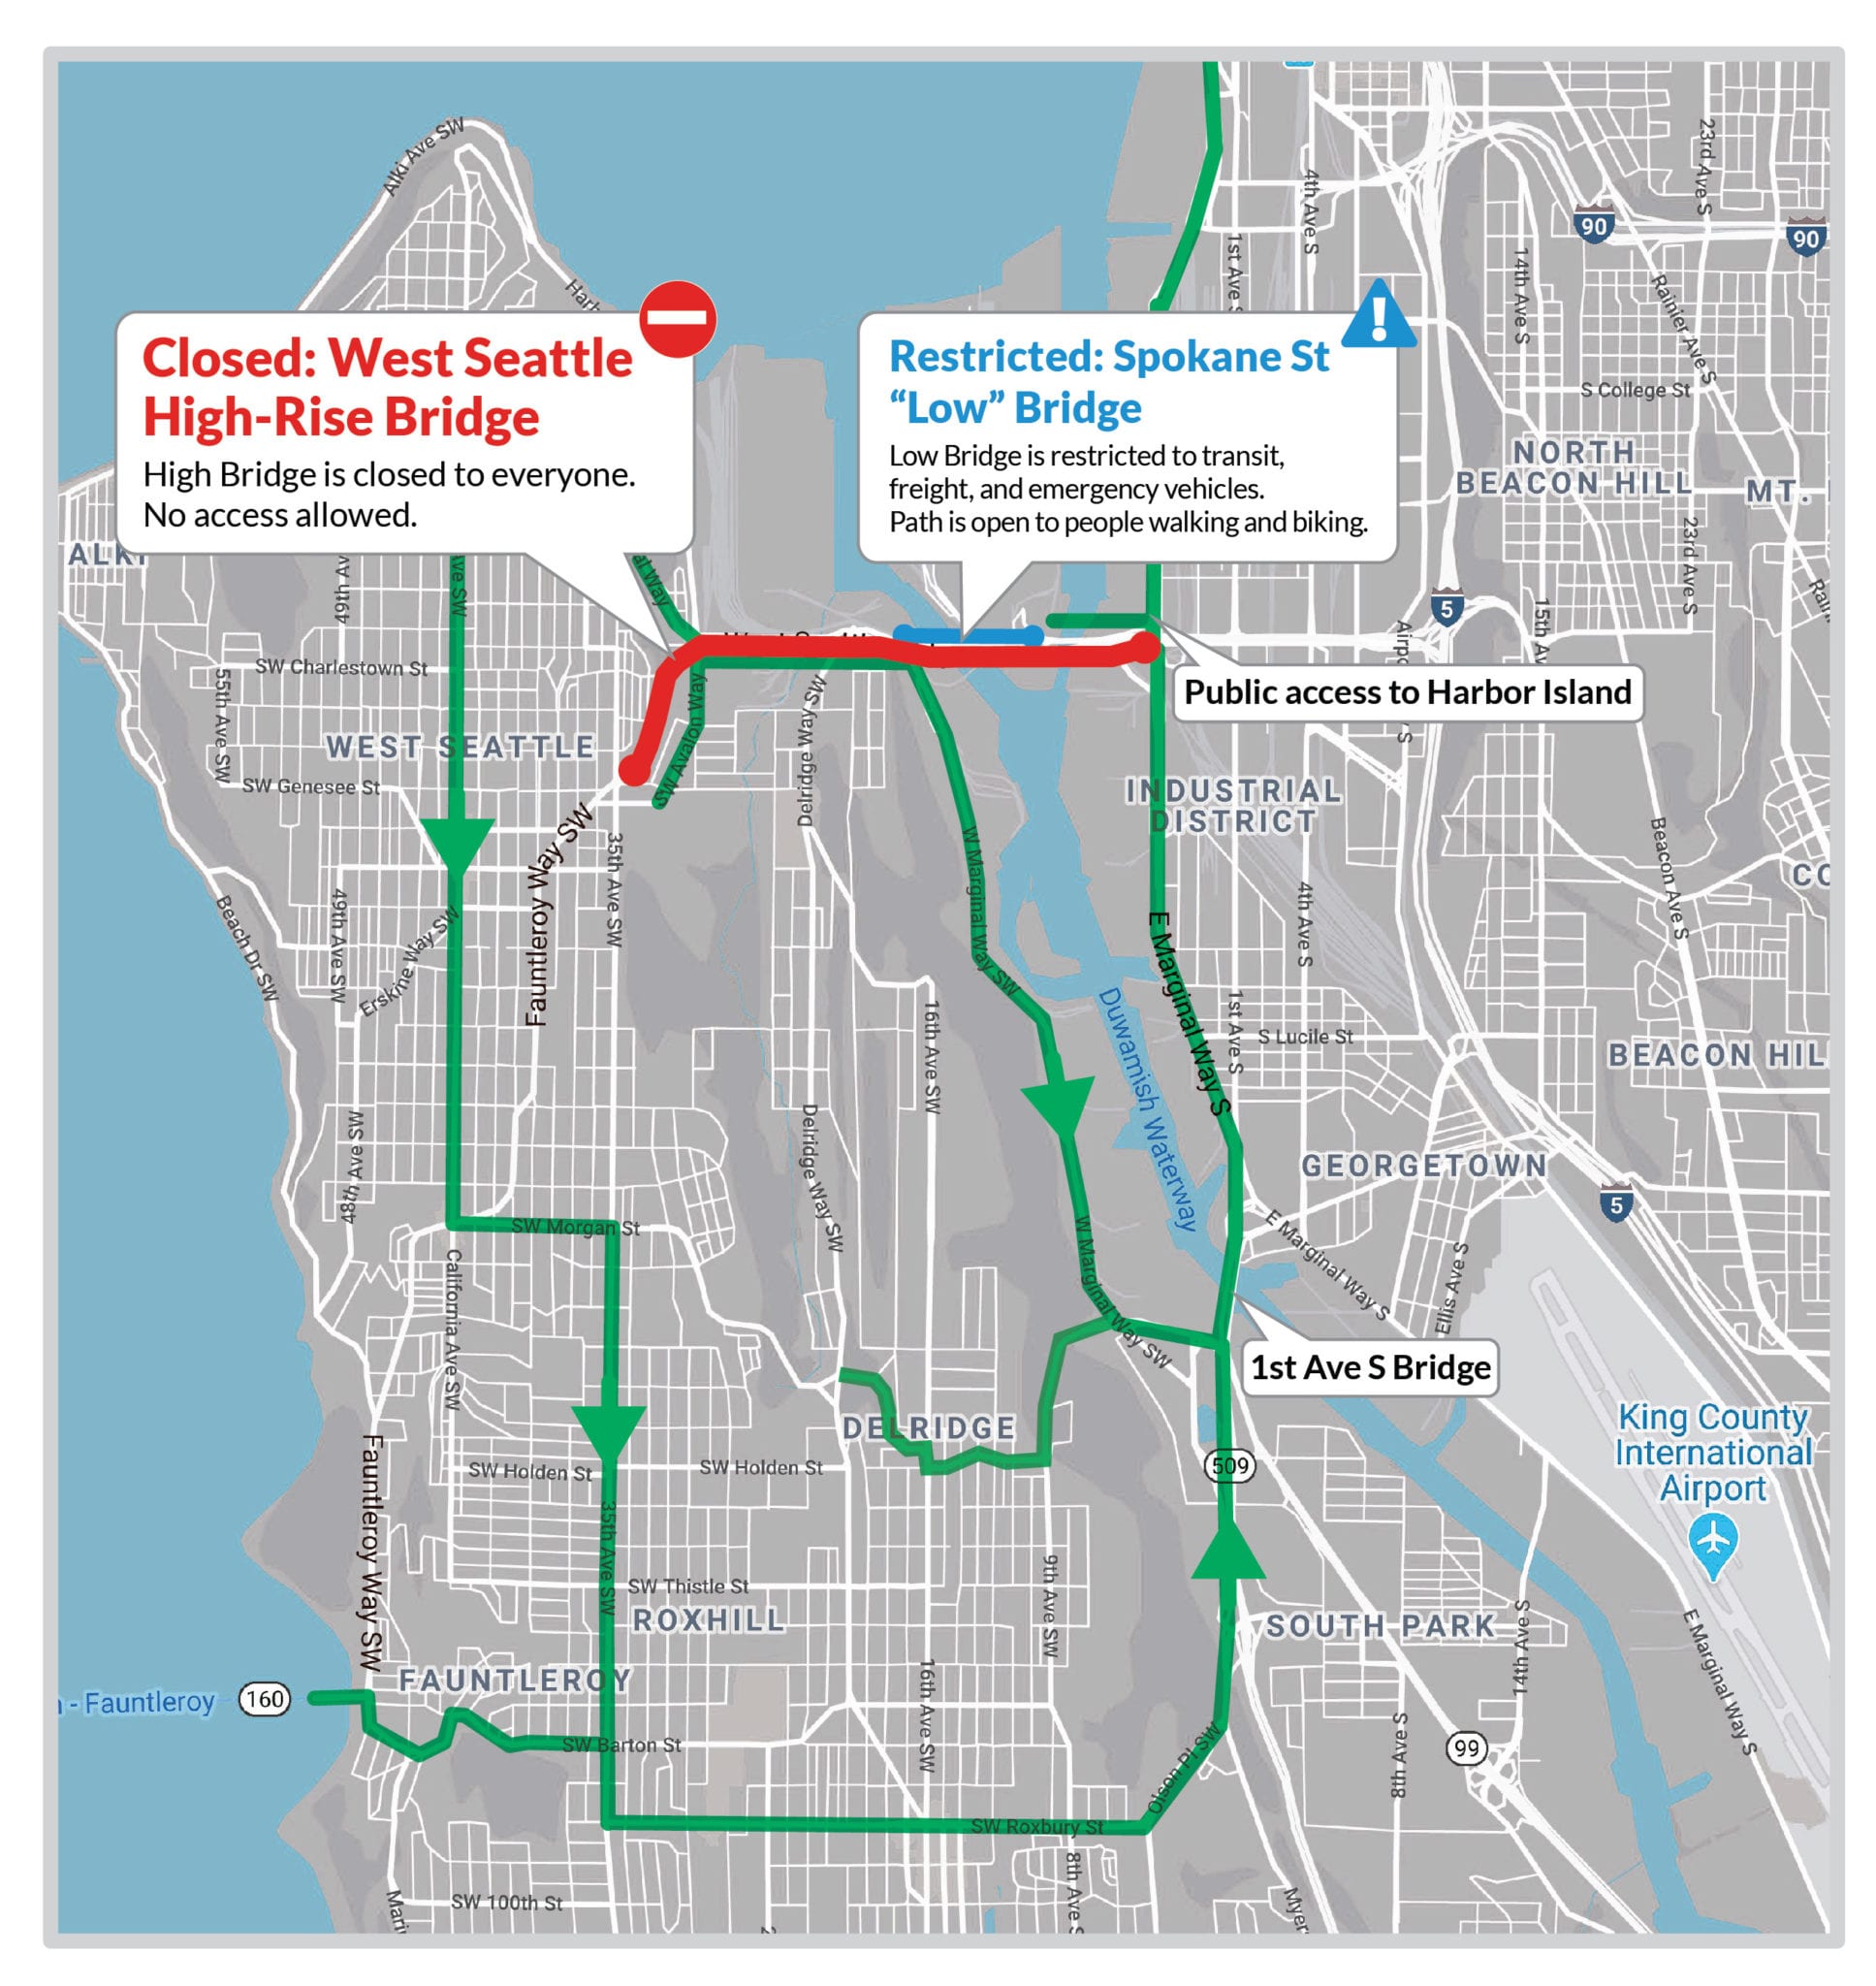 A map of the alternate route for people who are driving in and out of West Seattle following the closure of the West Seattle Bridge.